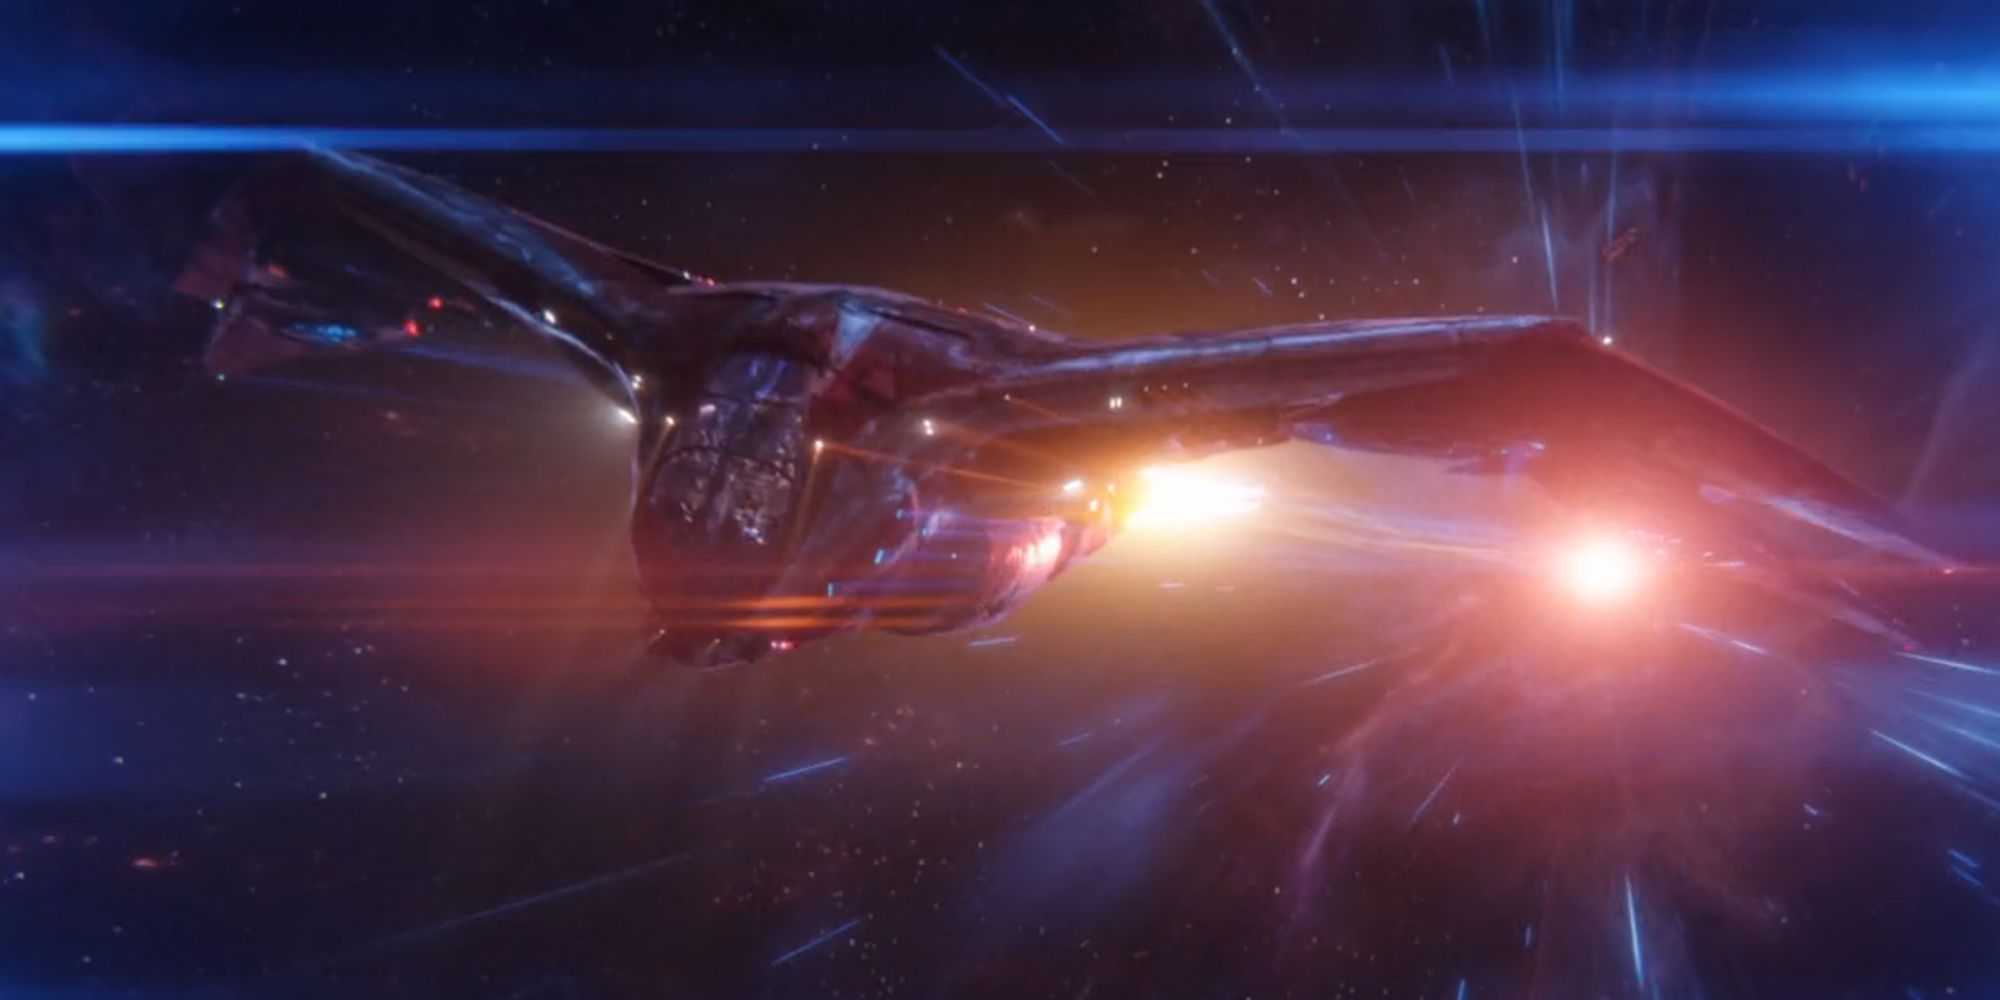 The Milano flying through space in Avengers Infinity War